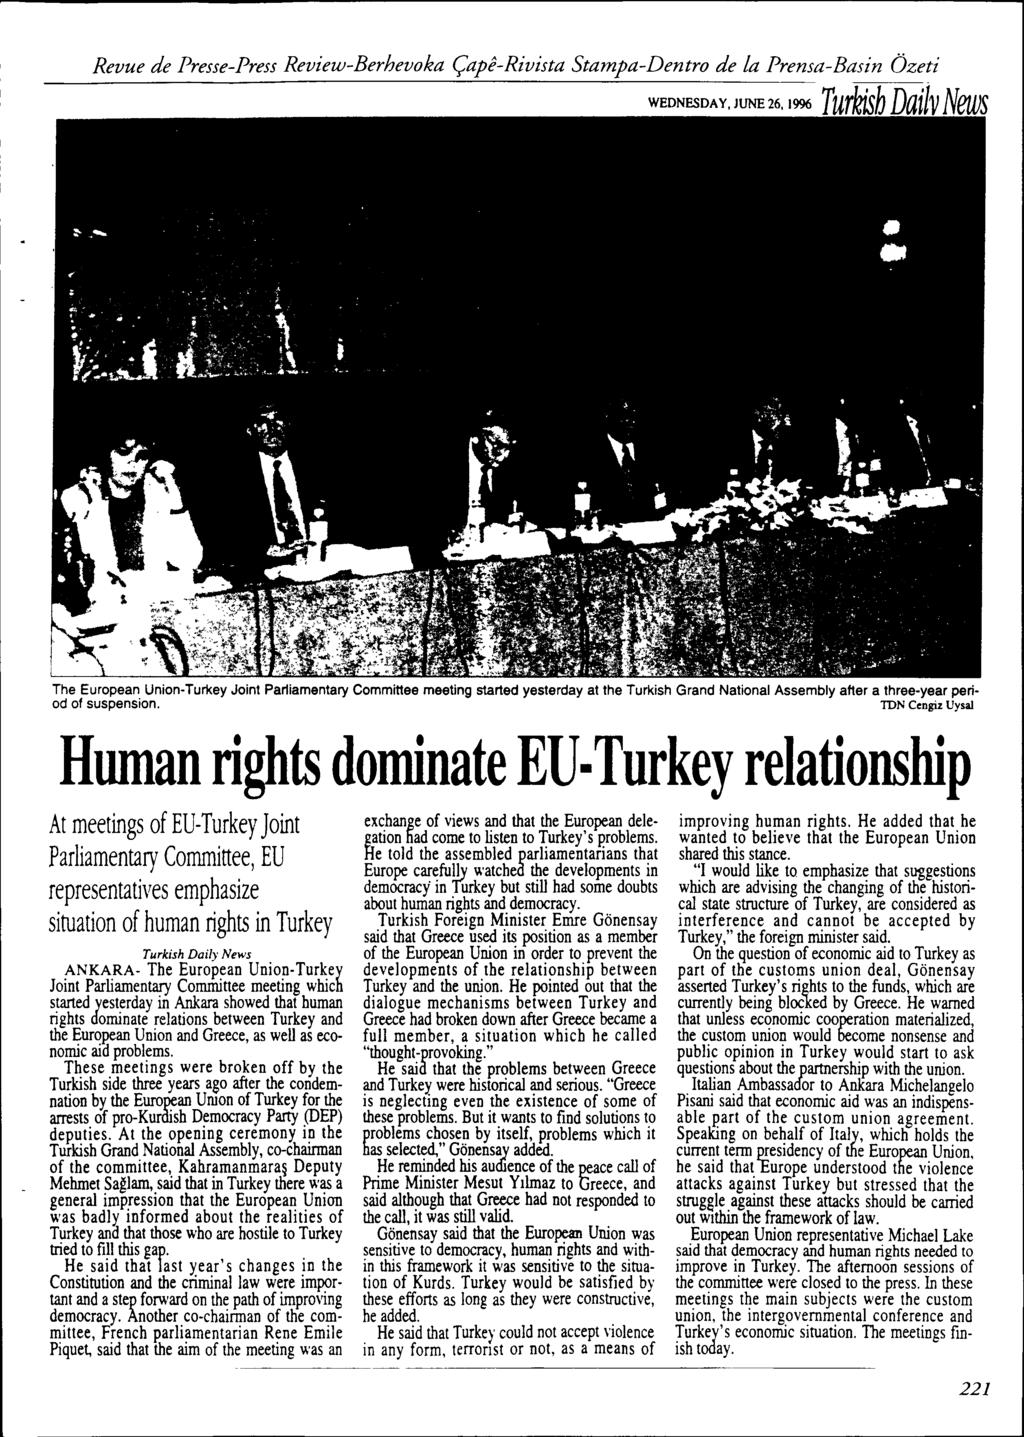 WEDNESDAY,JUNE26,1996 Turkish Dailv News The European Union-Turkey Joint Parliamentary Committee meeting started yesterday at the Turkish Grand National Assembly after a three-year period of